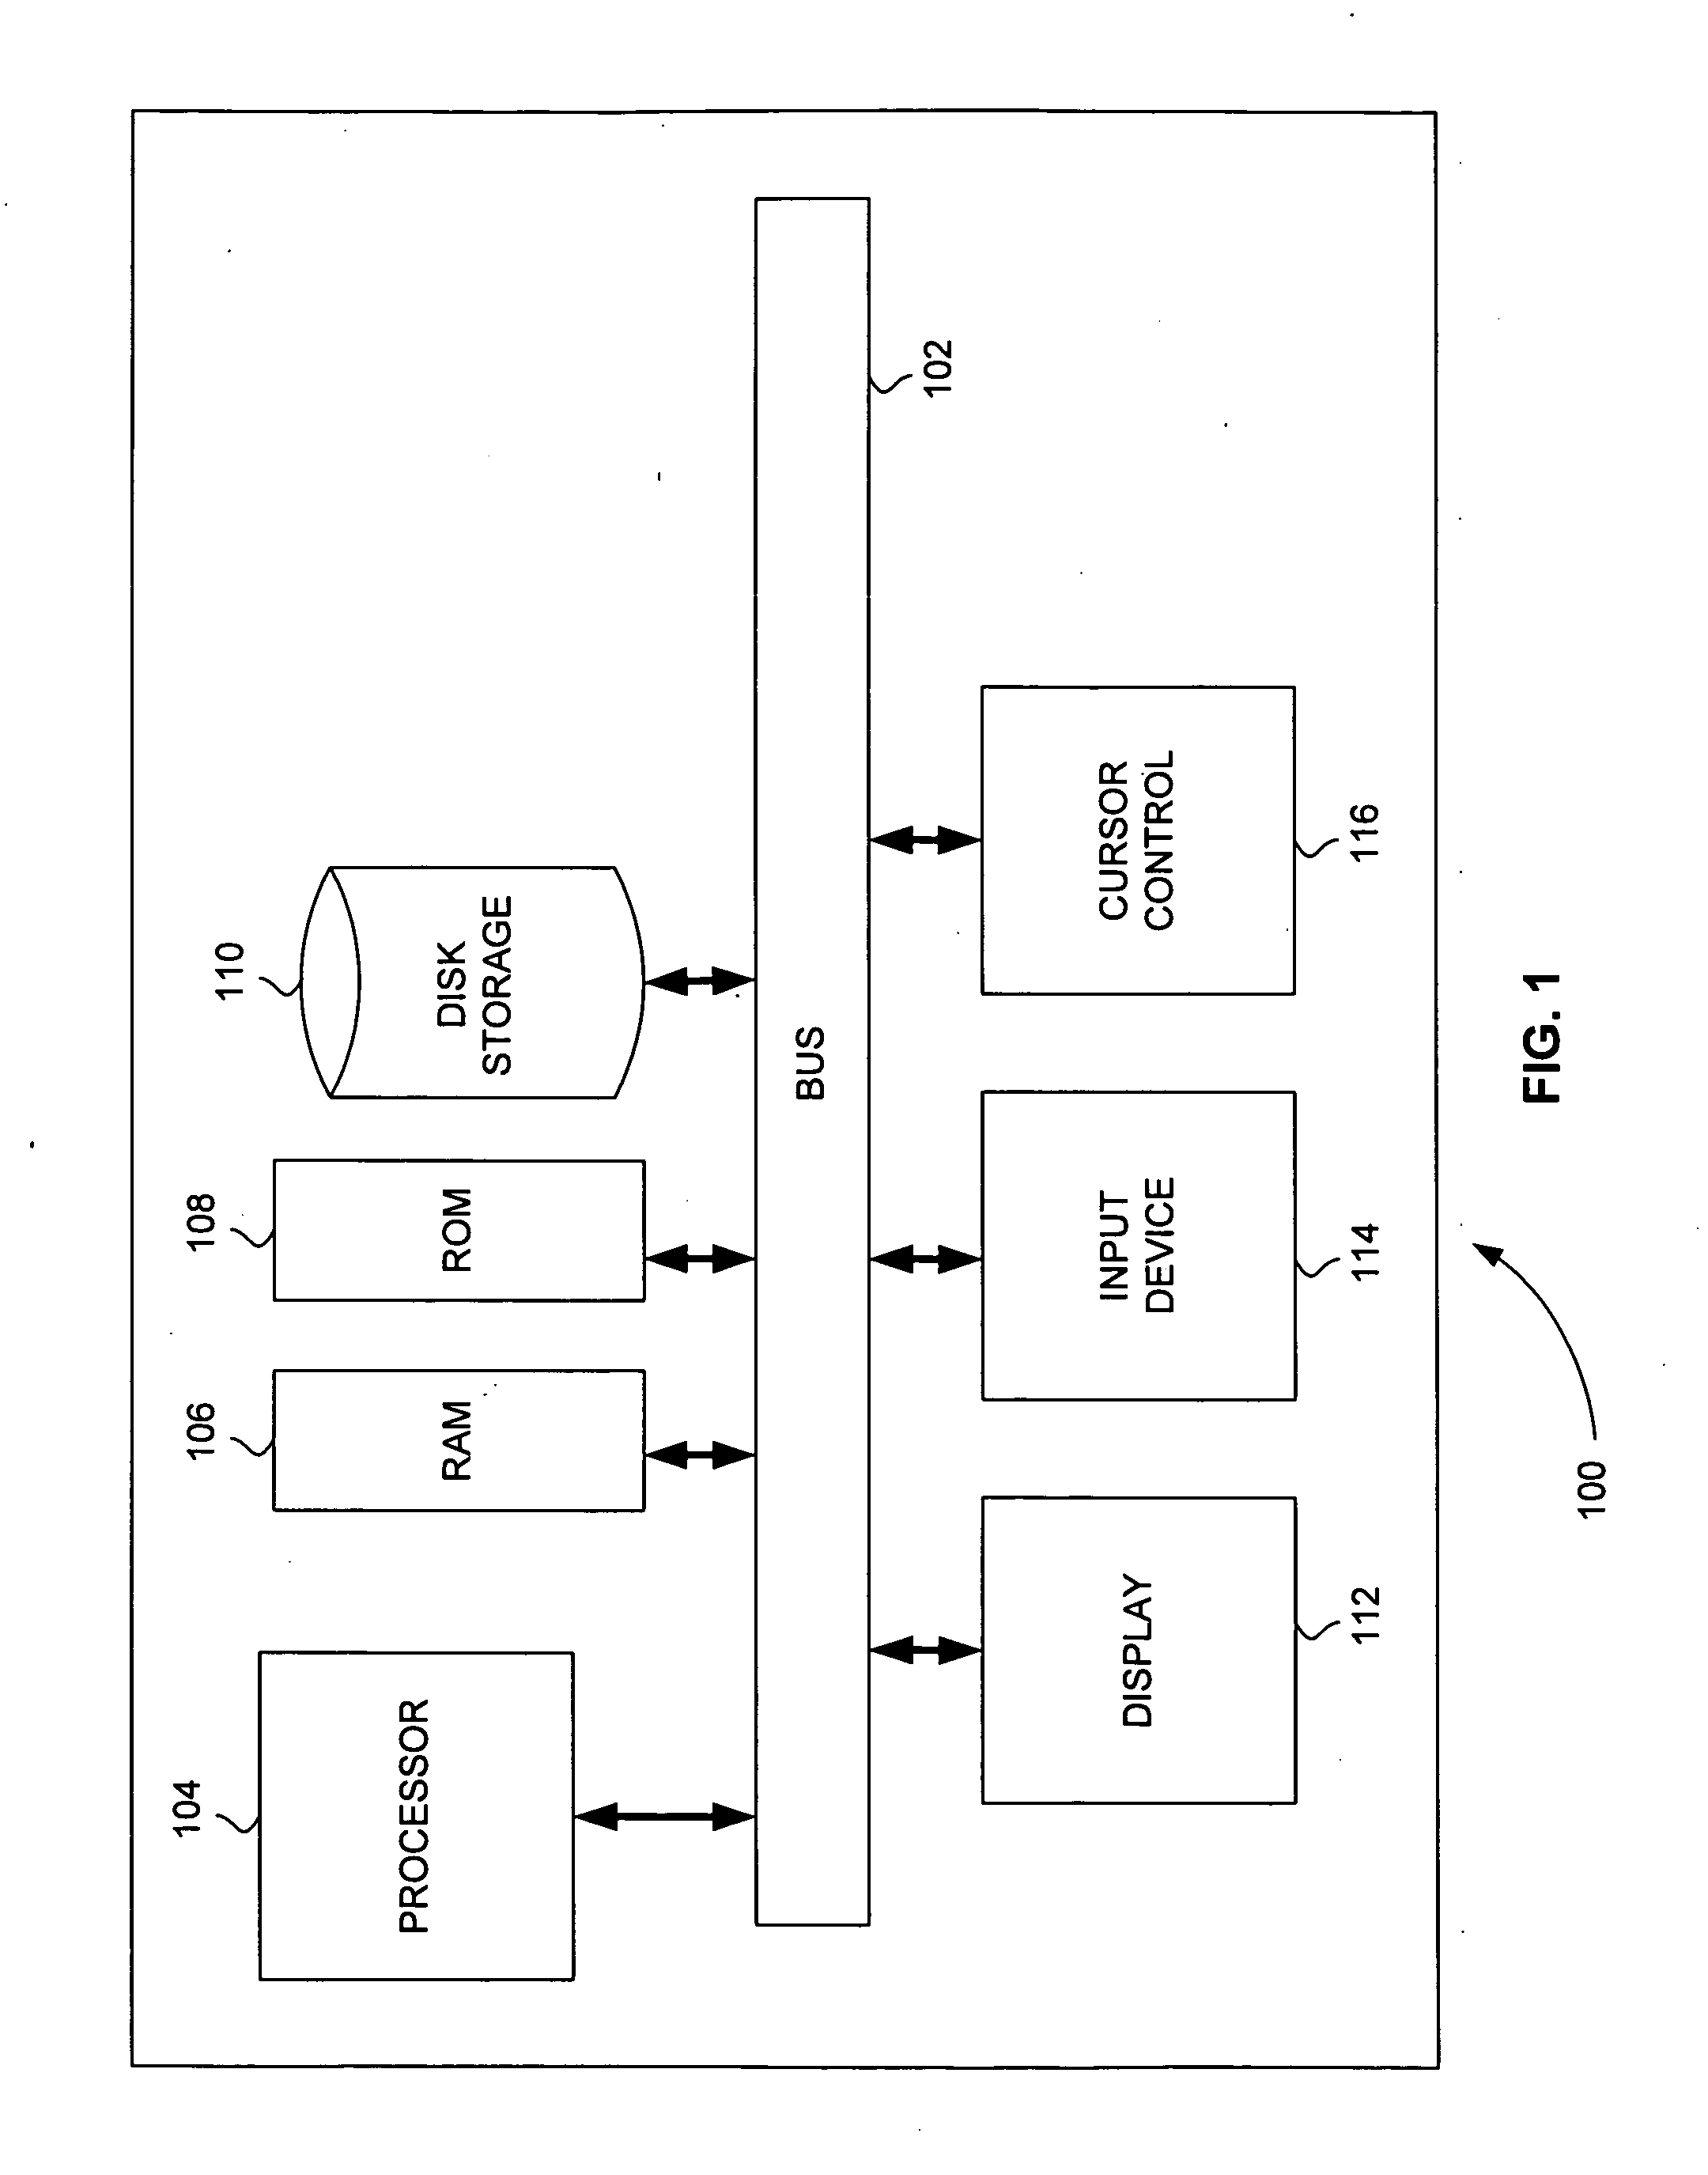 Systems and methods for identifying correlated variables in large amounts of data